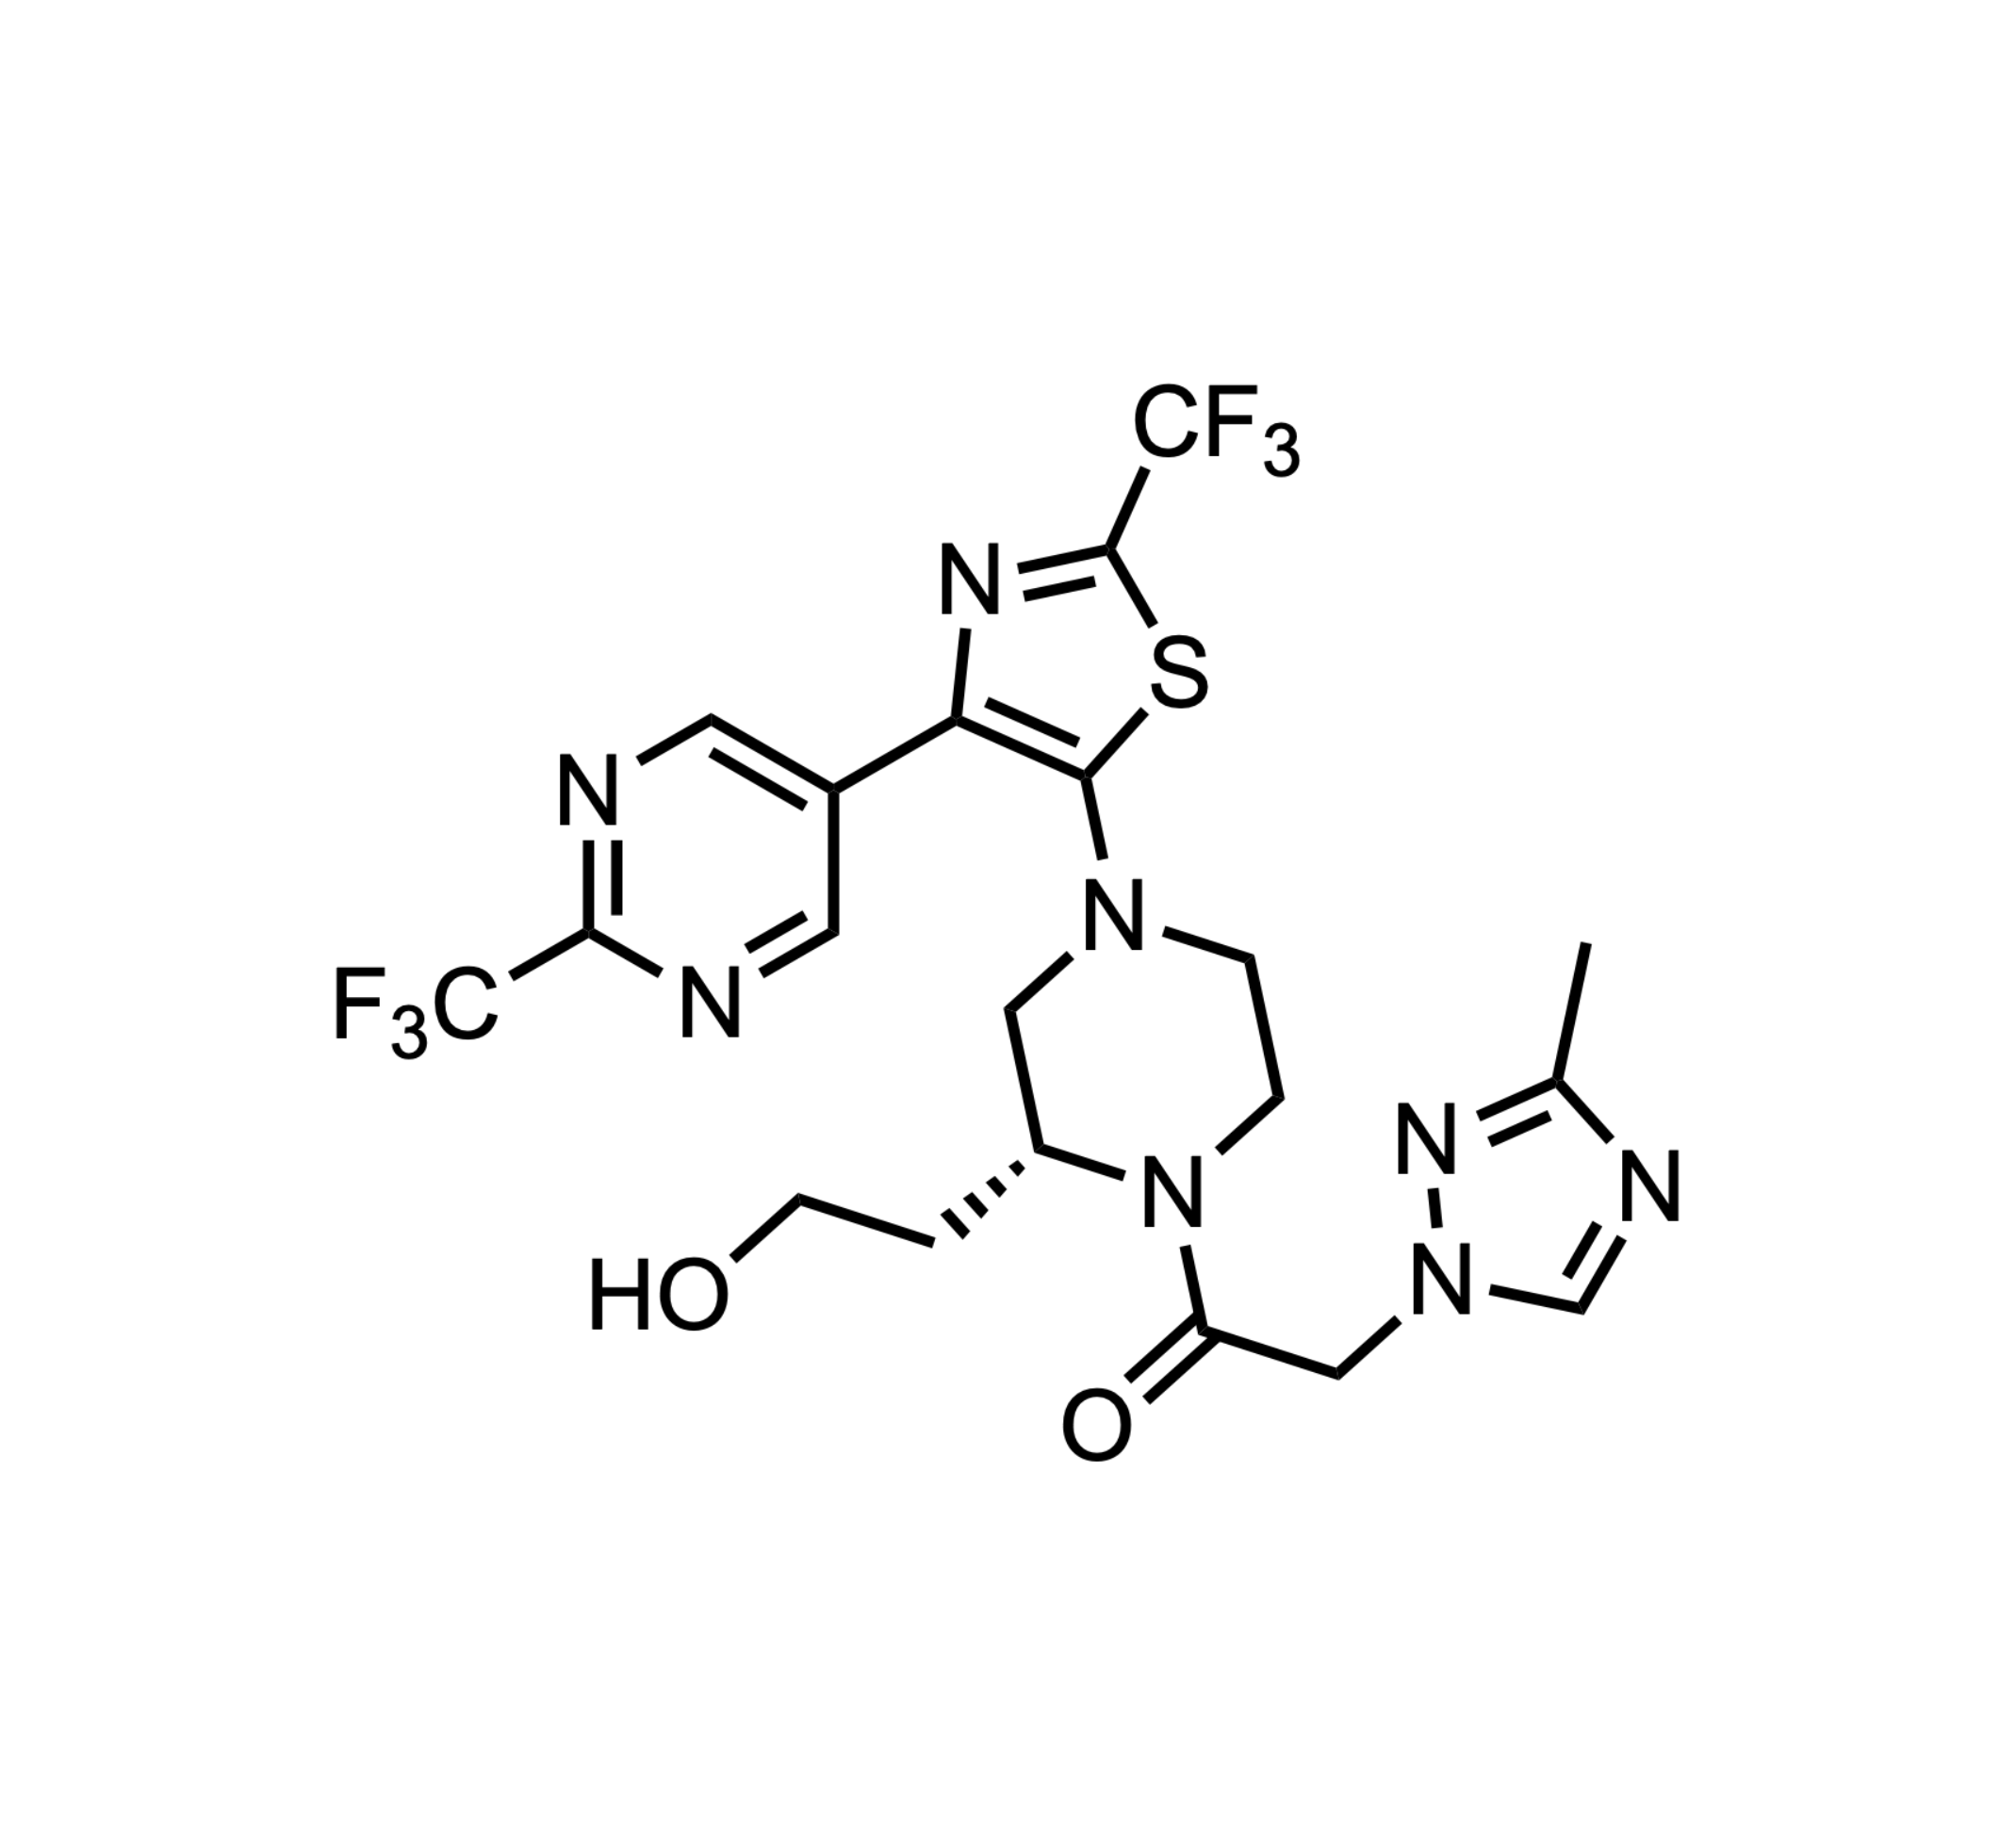 ACT-777991, oral reversible CXCR3 antagonist, Ph. I in healthy subjects, opt. of known CXCR3 antagonists, J. Med. Chem., March 8, 2023, IDORSIA PHARMACEUTICALS LTD, CH